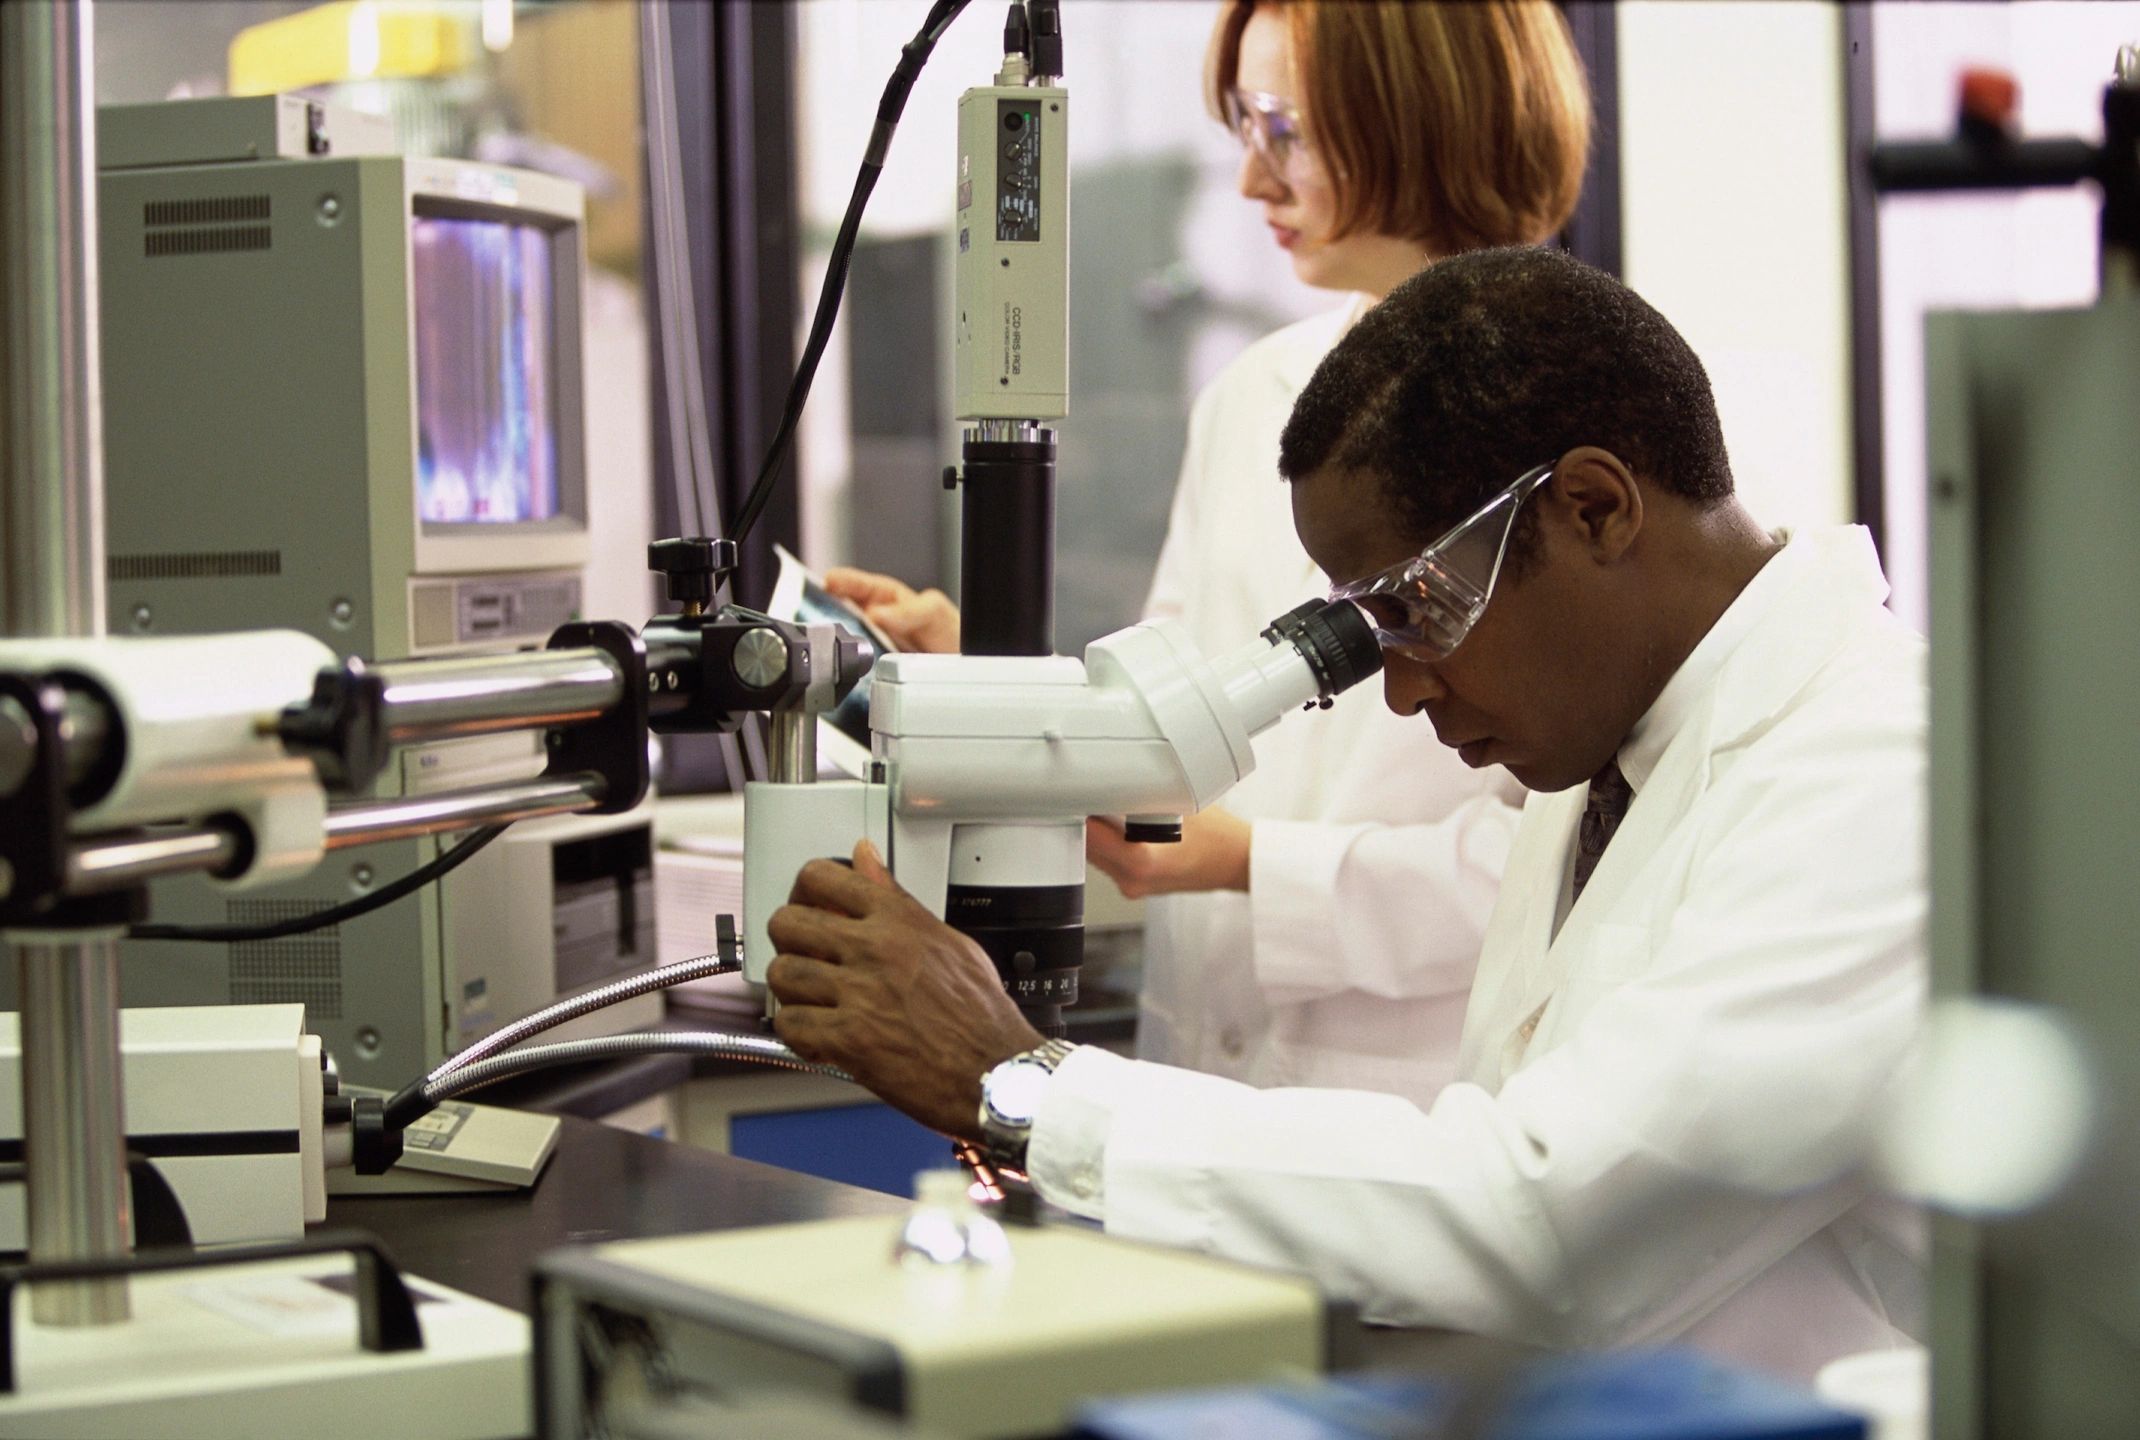 Scientists in lab using microscope